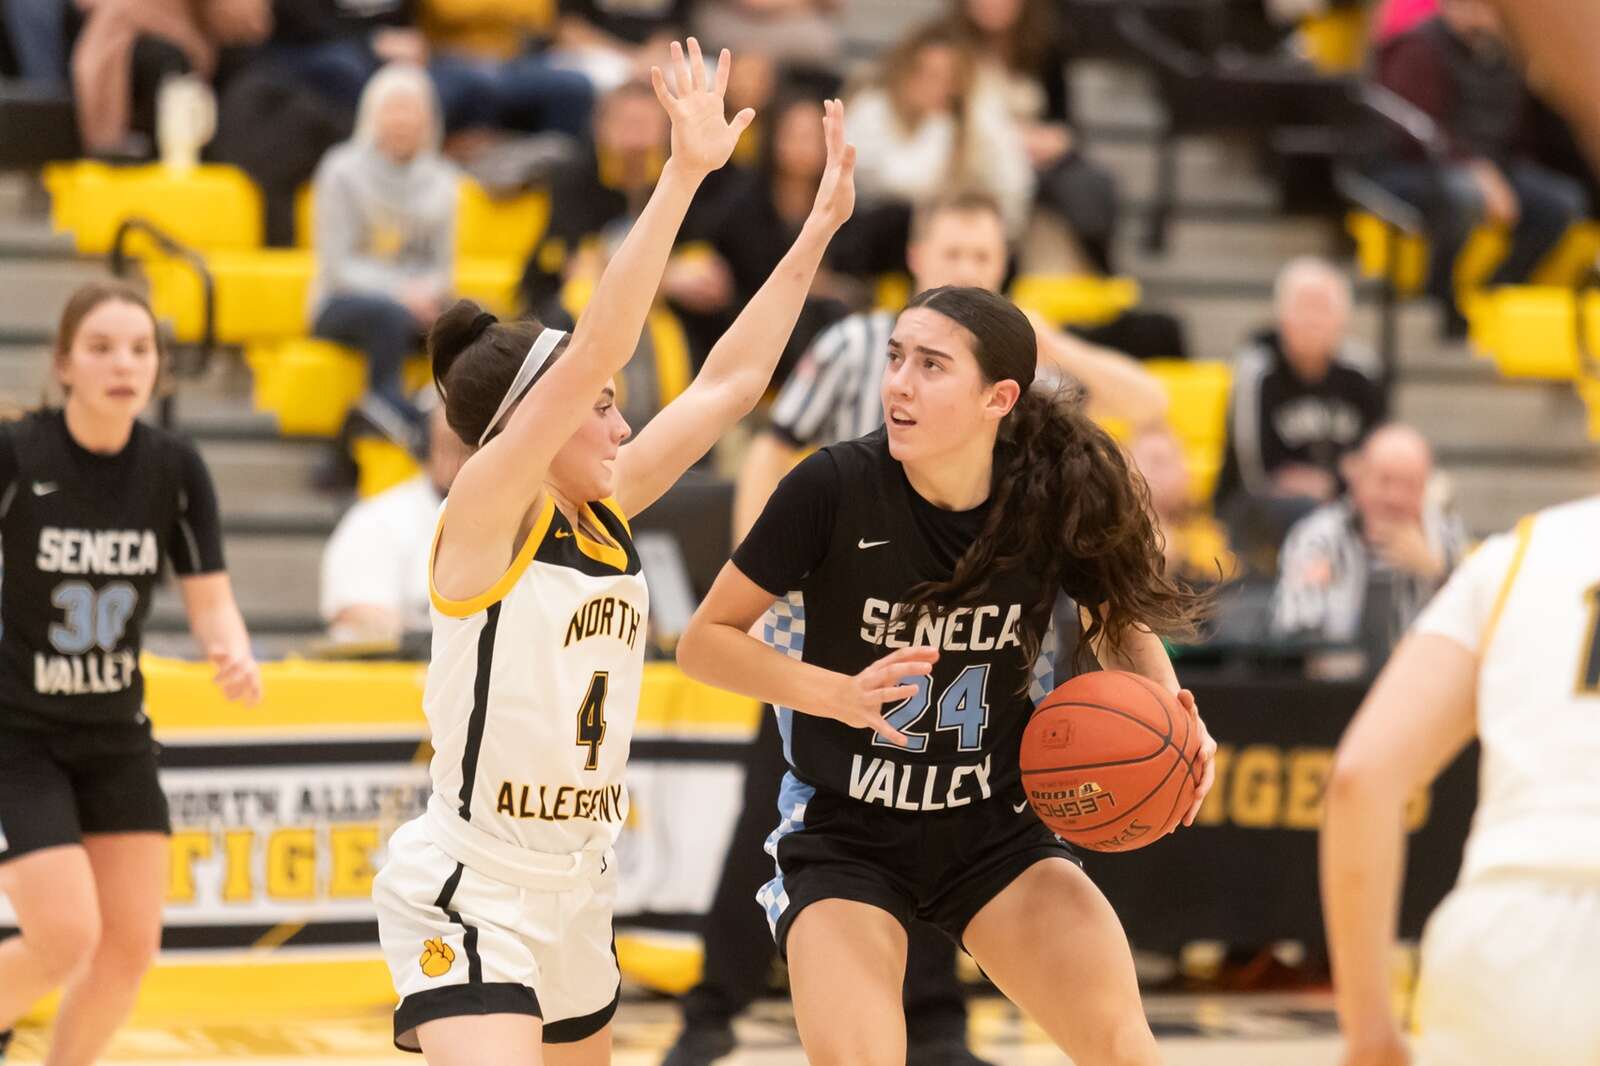 Natalie Hambly backs down North Allegheny’s Kellie McConnell